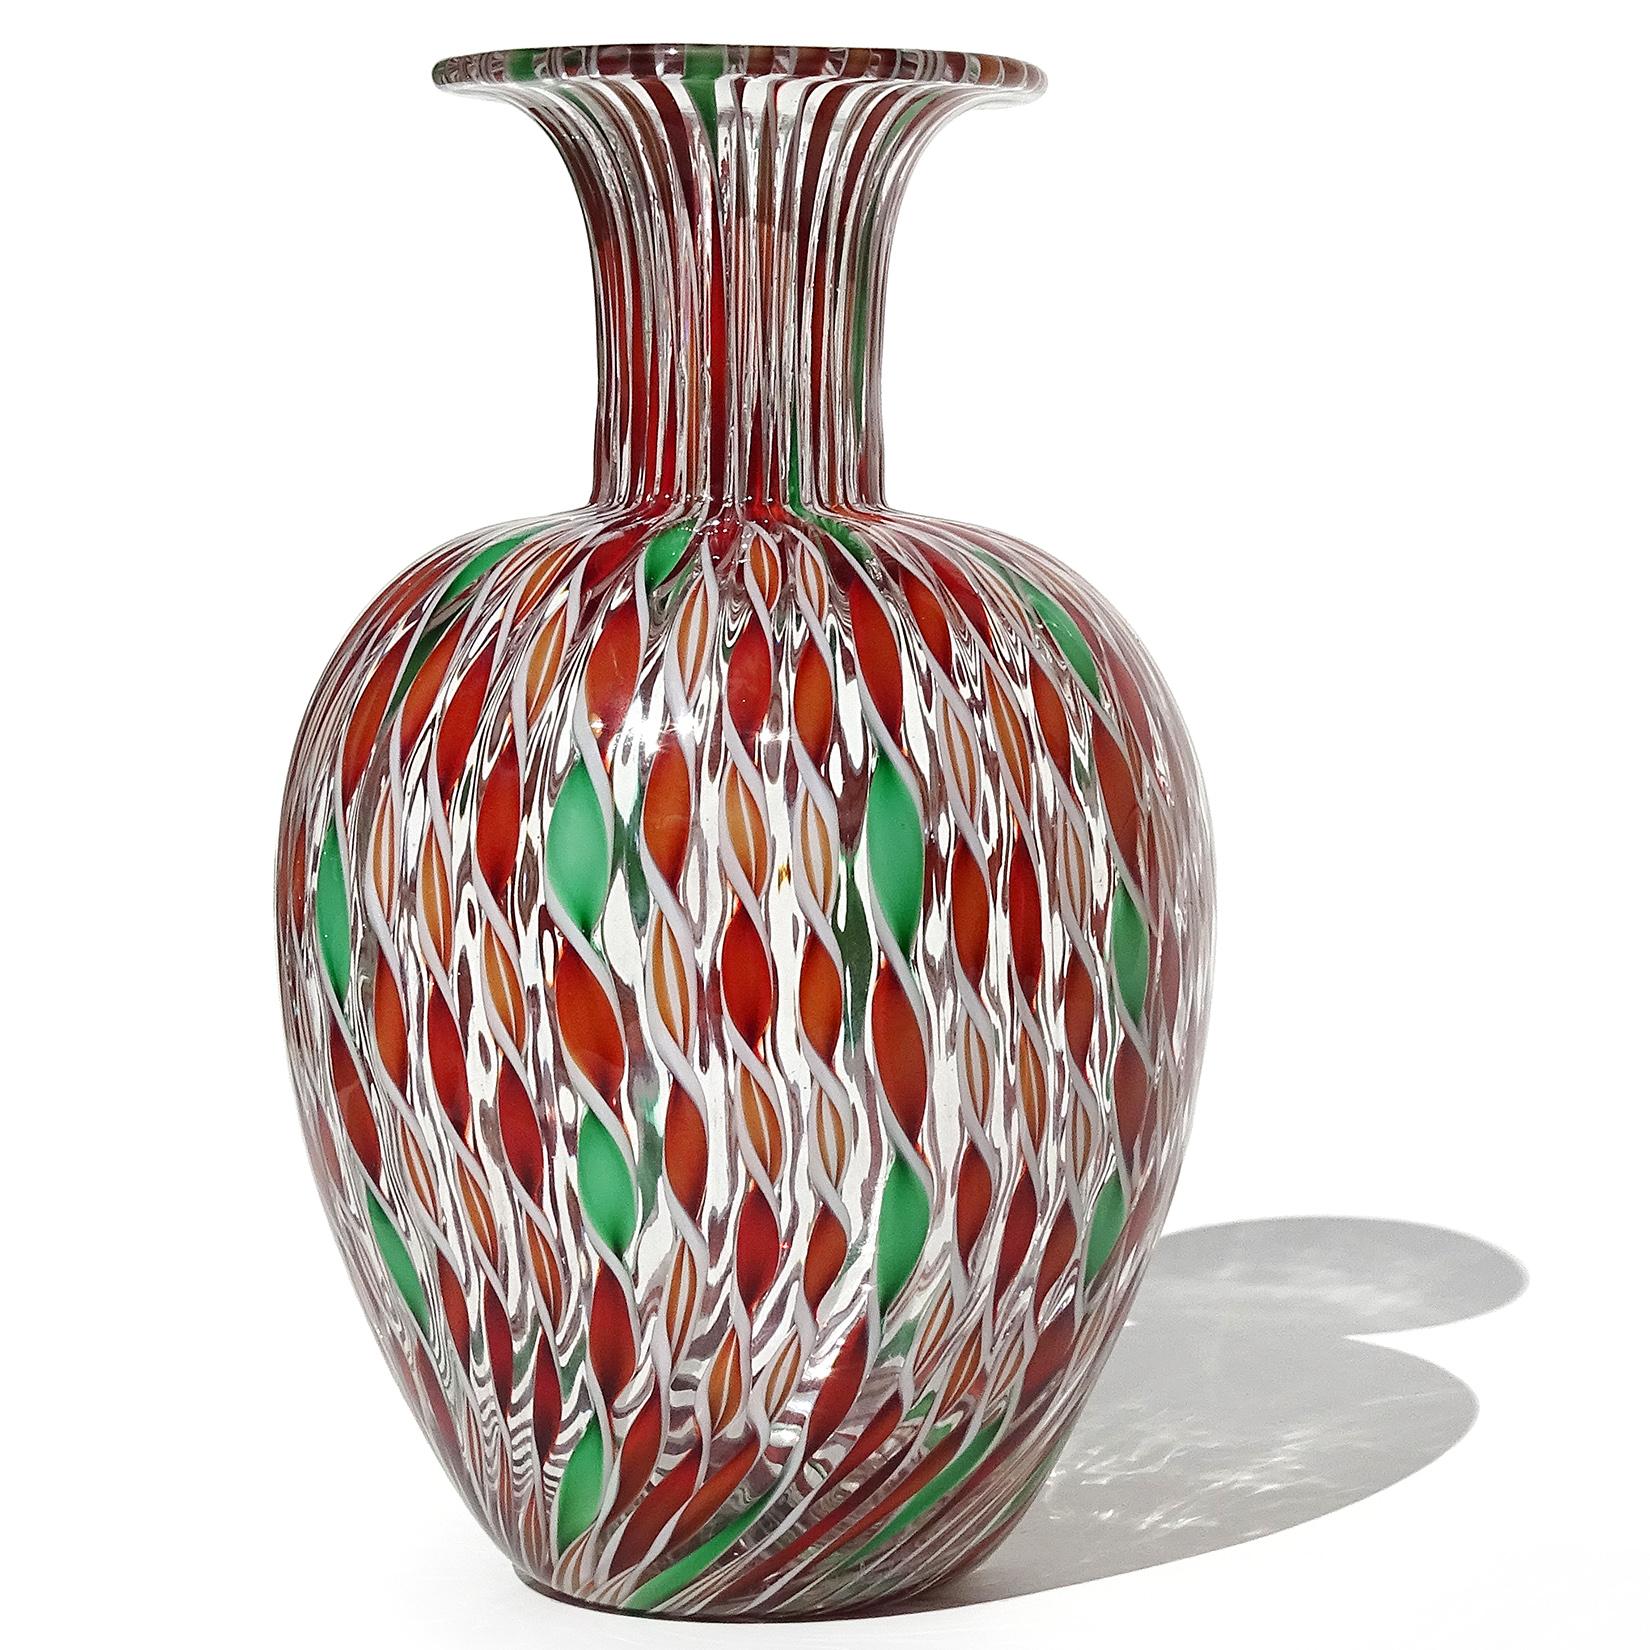 Beautiful vintage Murano hand blown red, green, orange and white twisted ribbons Italian art glass flower vase. Created in the manner of the Fratelli Toso company. The vase has an alternating repeating pattern, with the red and green ribbons between